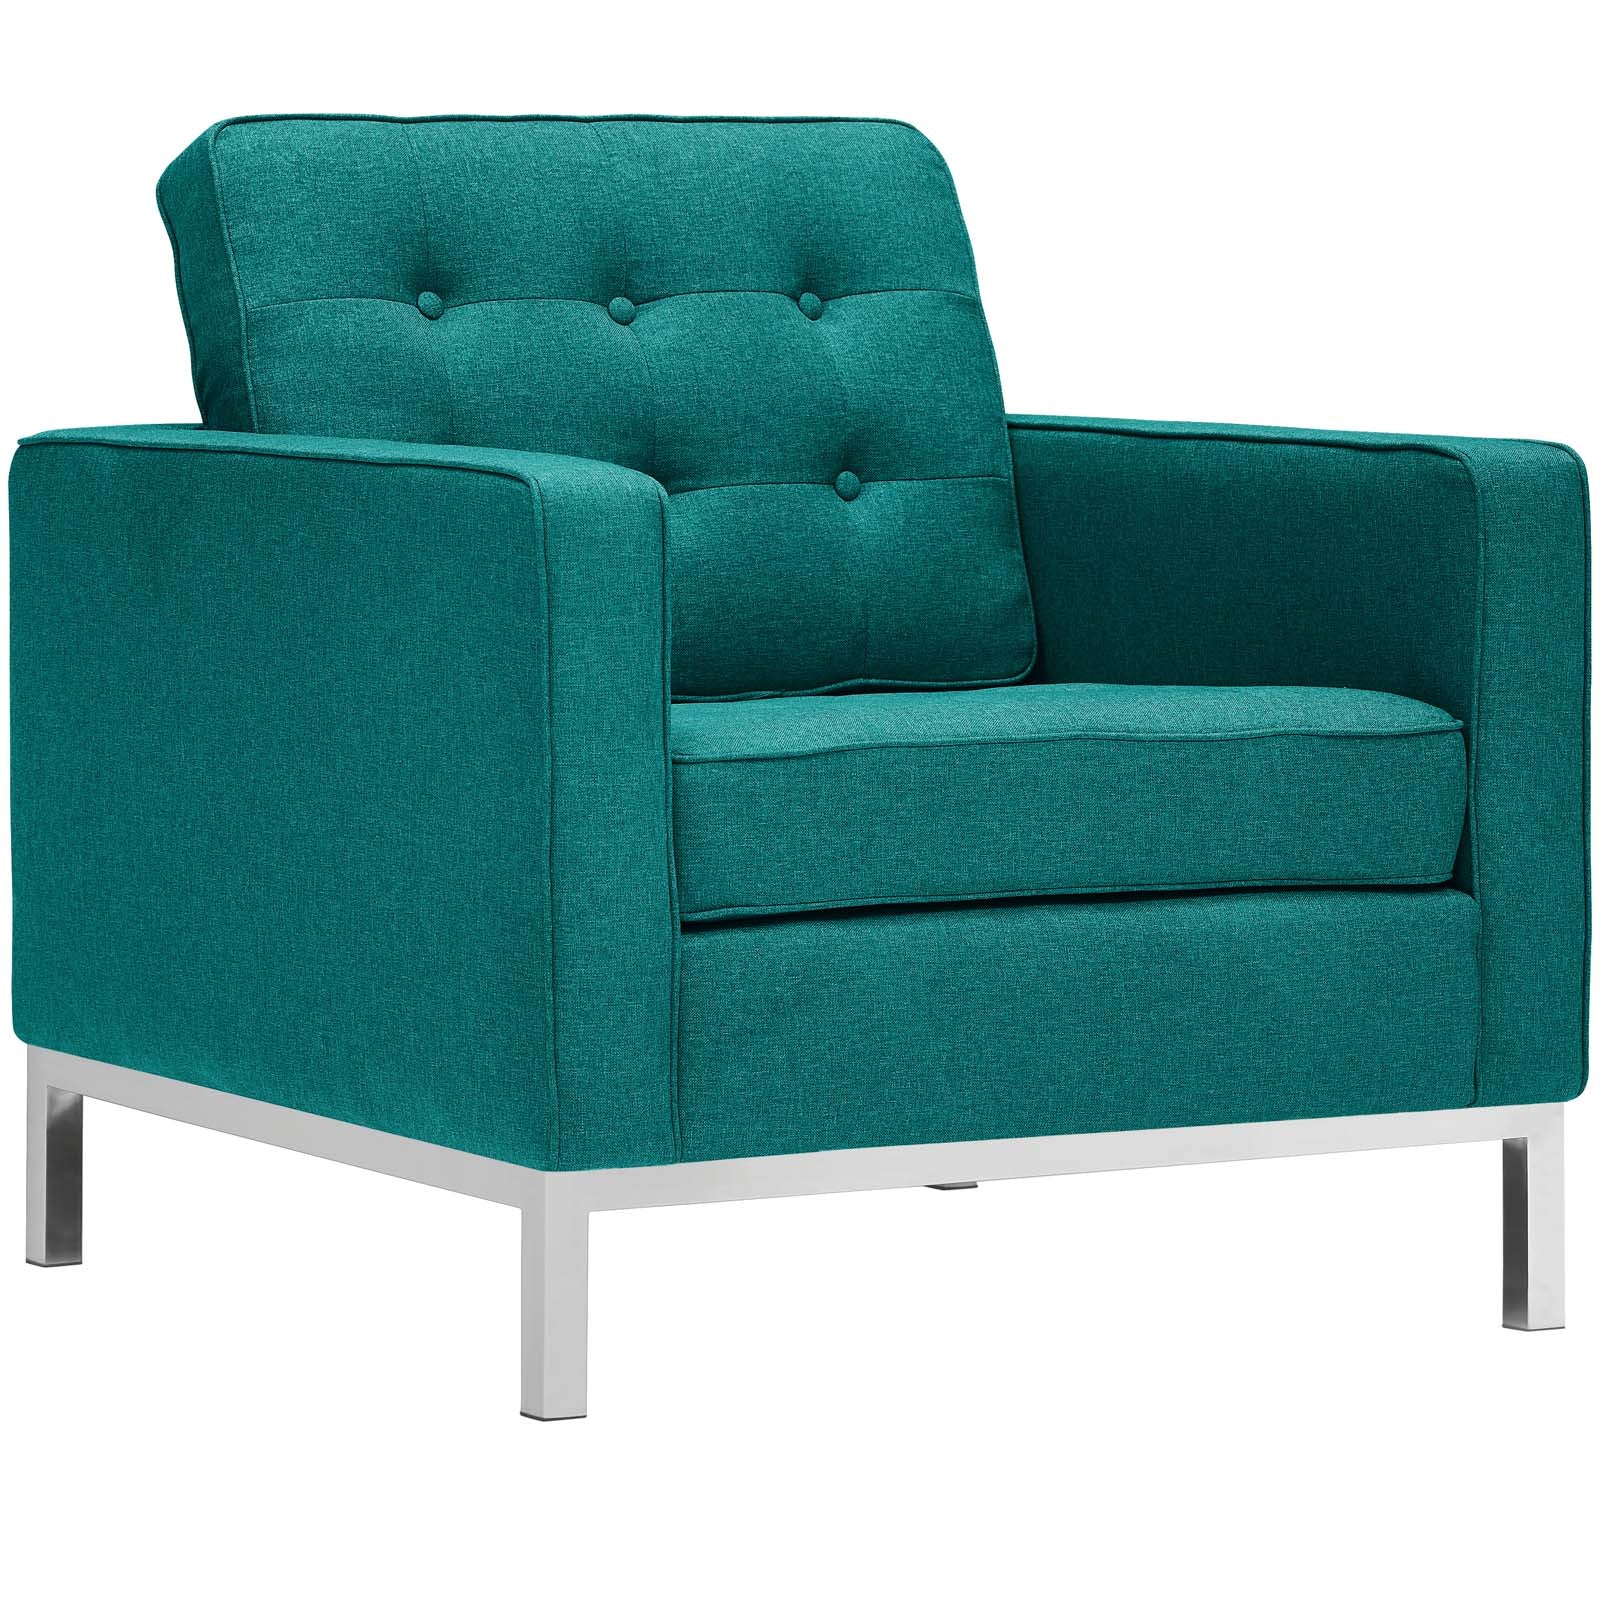 Modway Living Room Sets - Loft Armchairs Upholstered Fabric Teal (Set of 2)